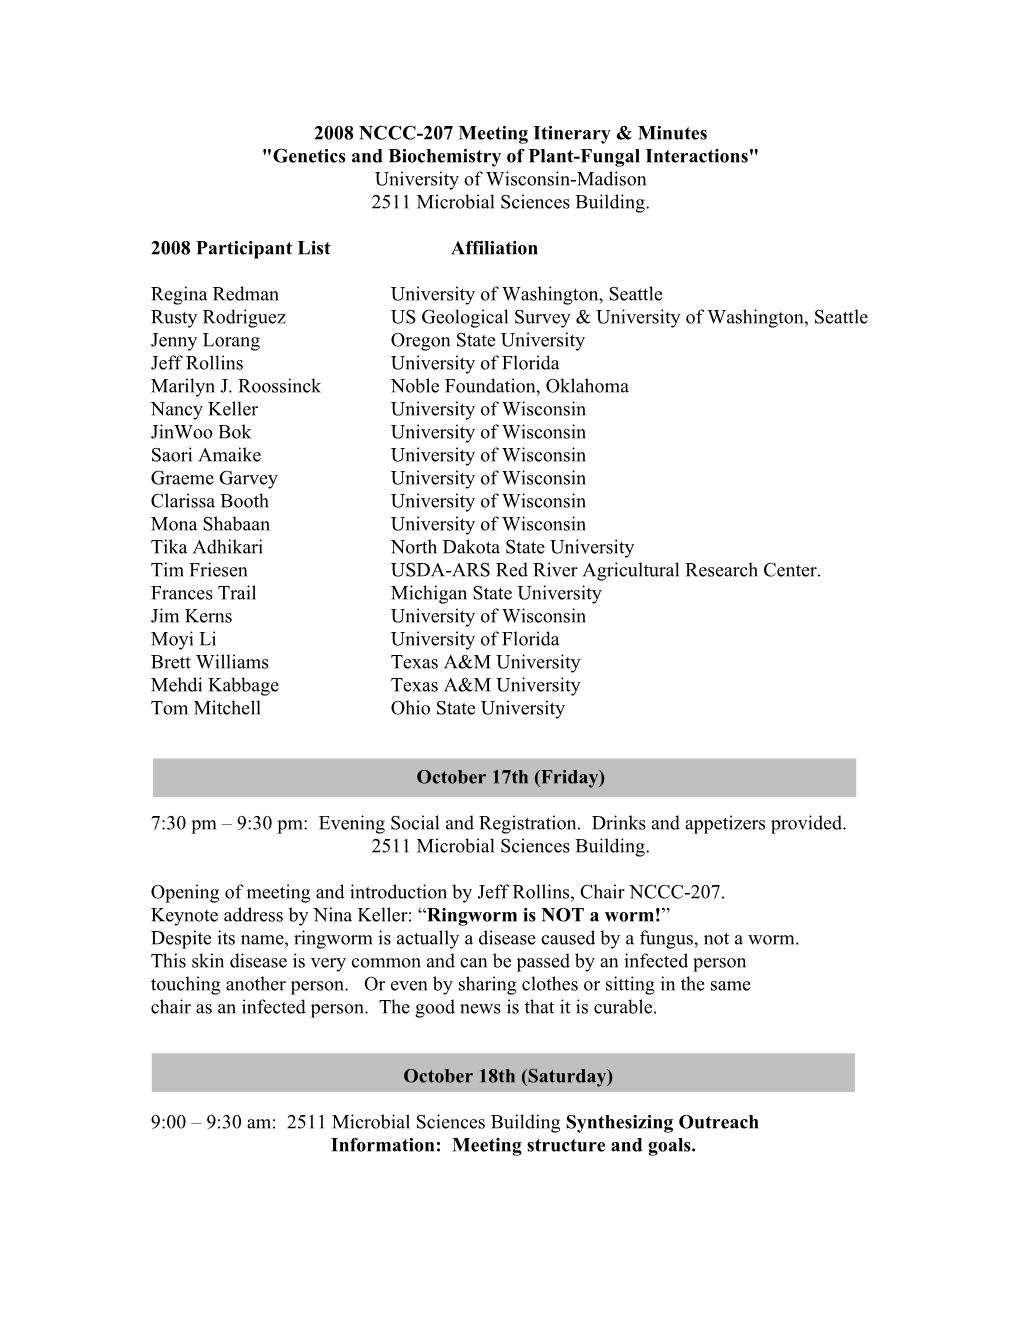 2008 NCCC-173 Meeting Itinerary: Genetics and Biochemistry of Plant-Fungal Interactions